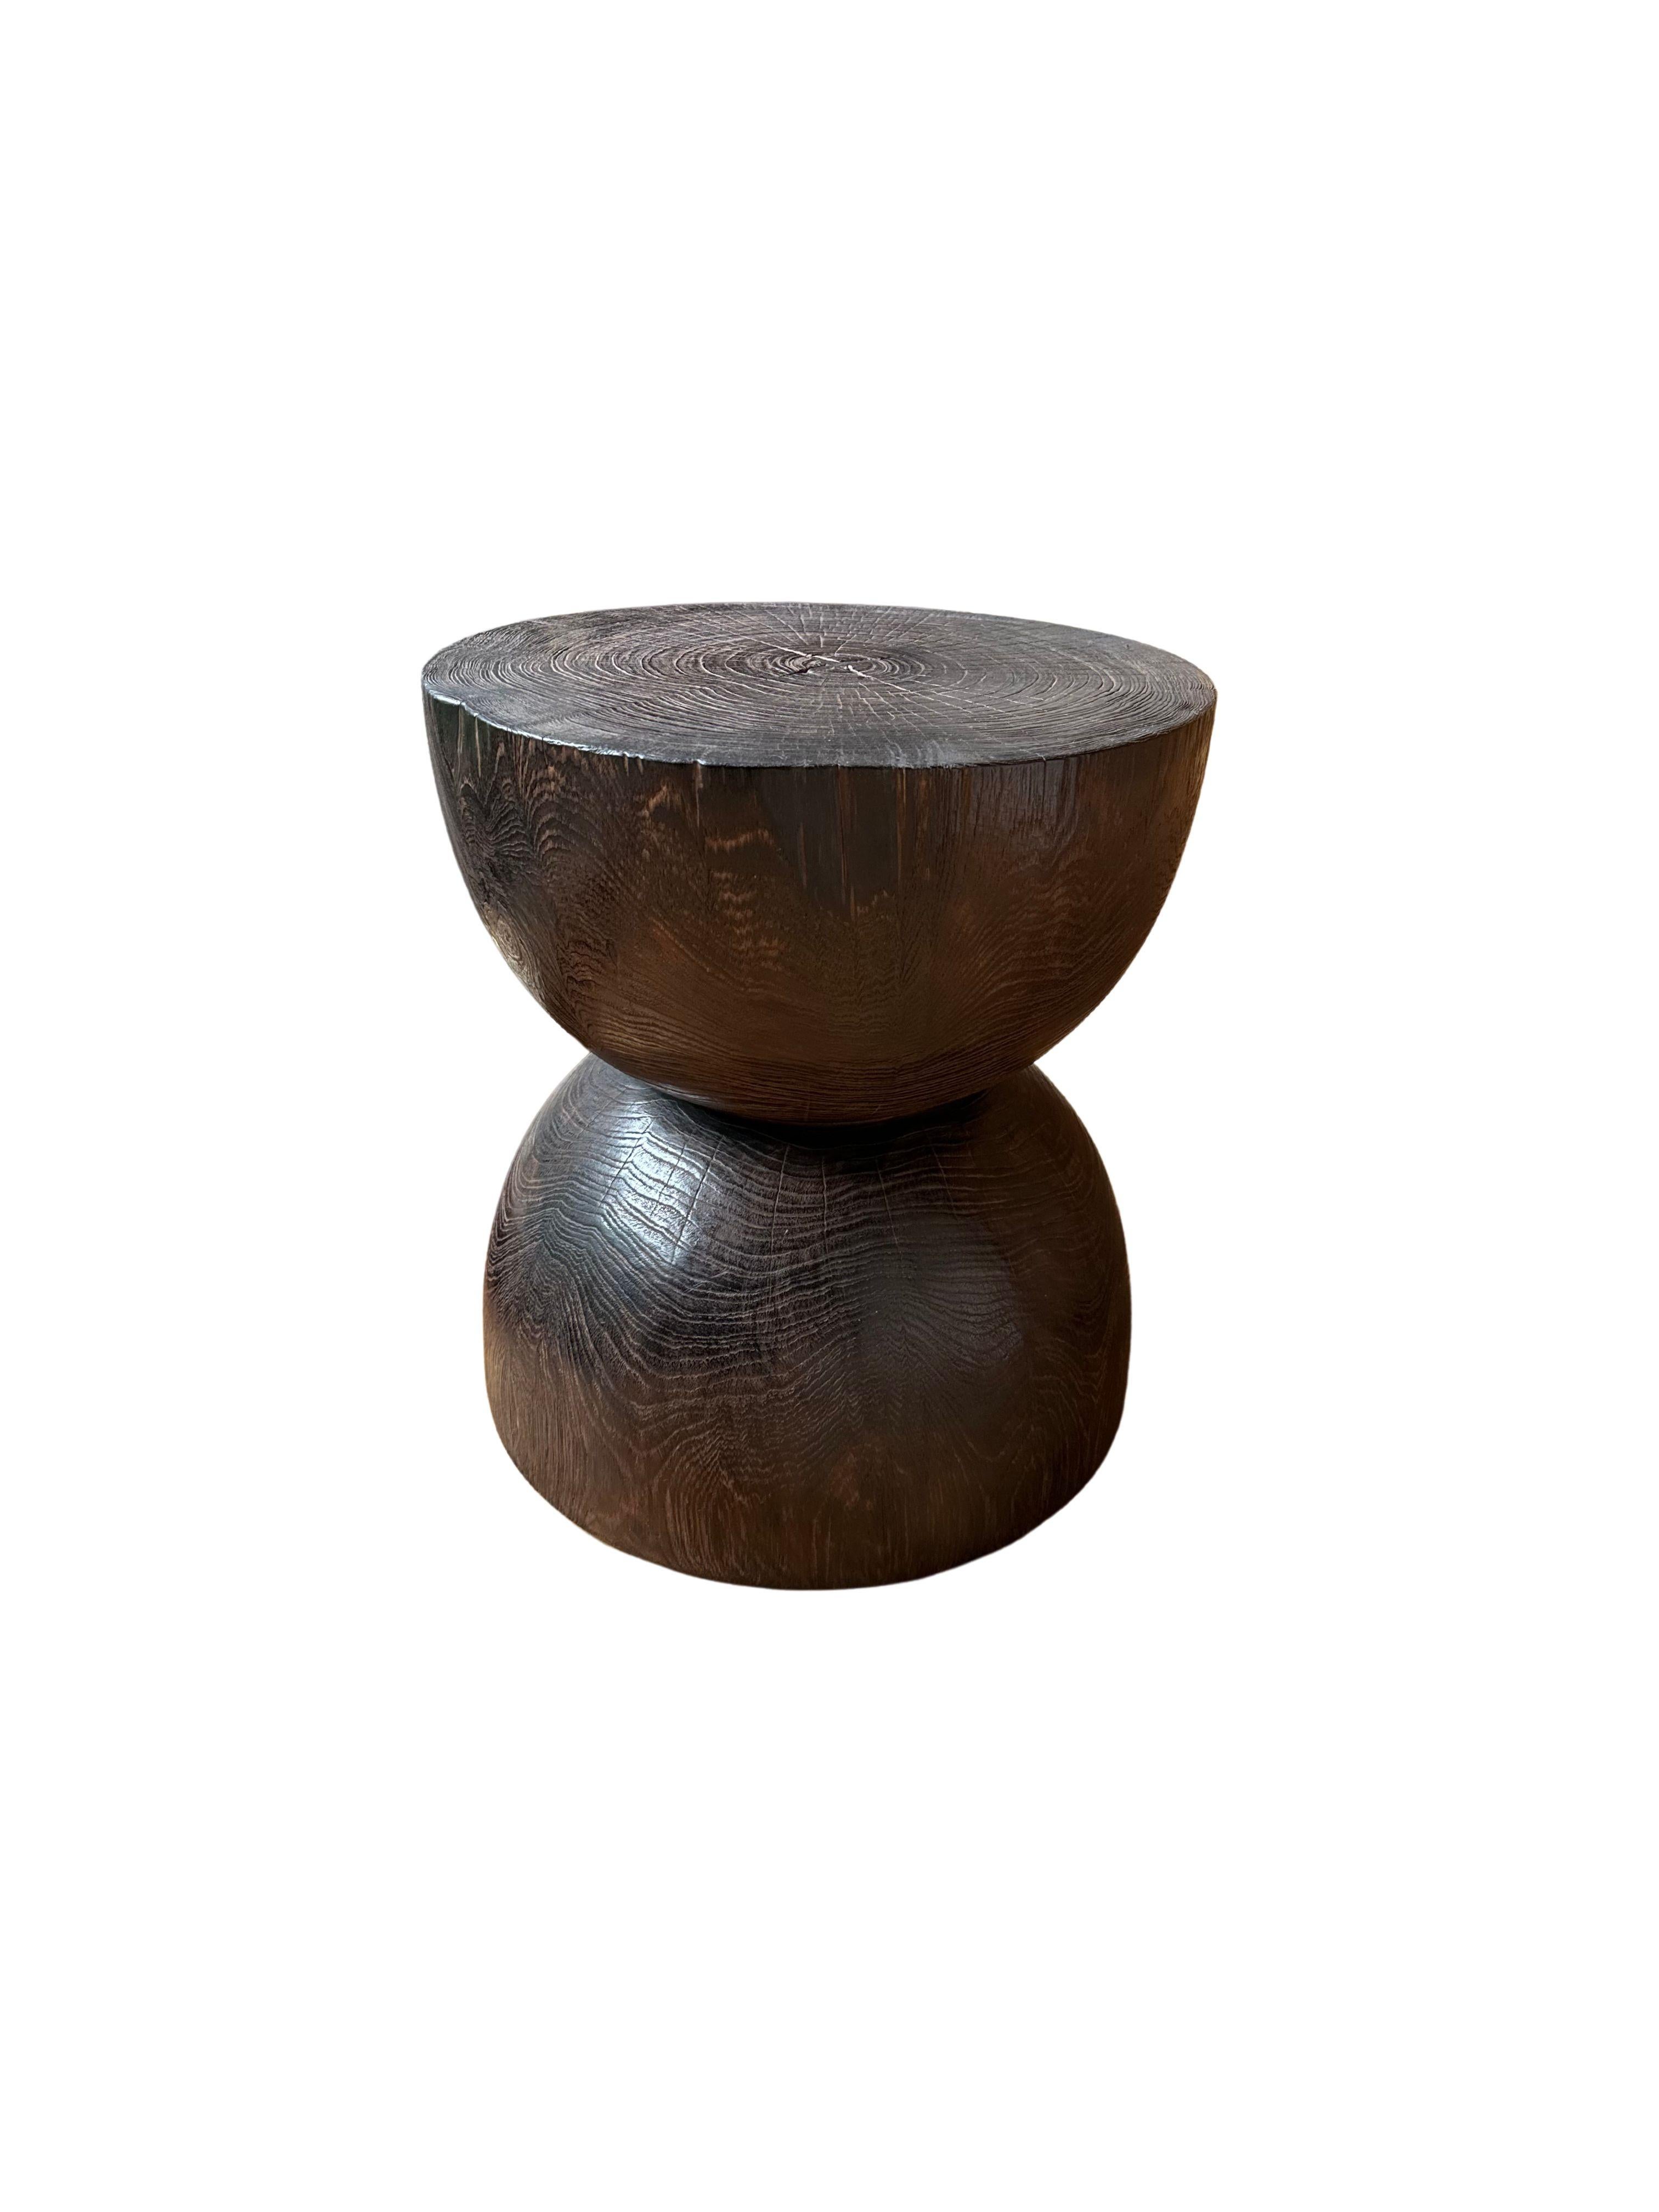 A wonderfully sculpted side table, crafted from a single block of teak wood. It features wonderful wood textures as well as an hour glass form. To achieve its pigment the wood was burnt several times and finished with a clear coat. 